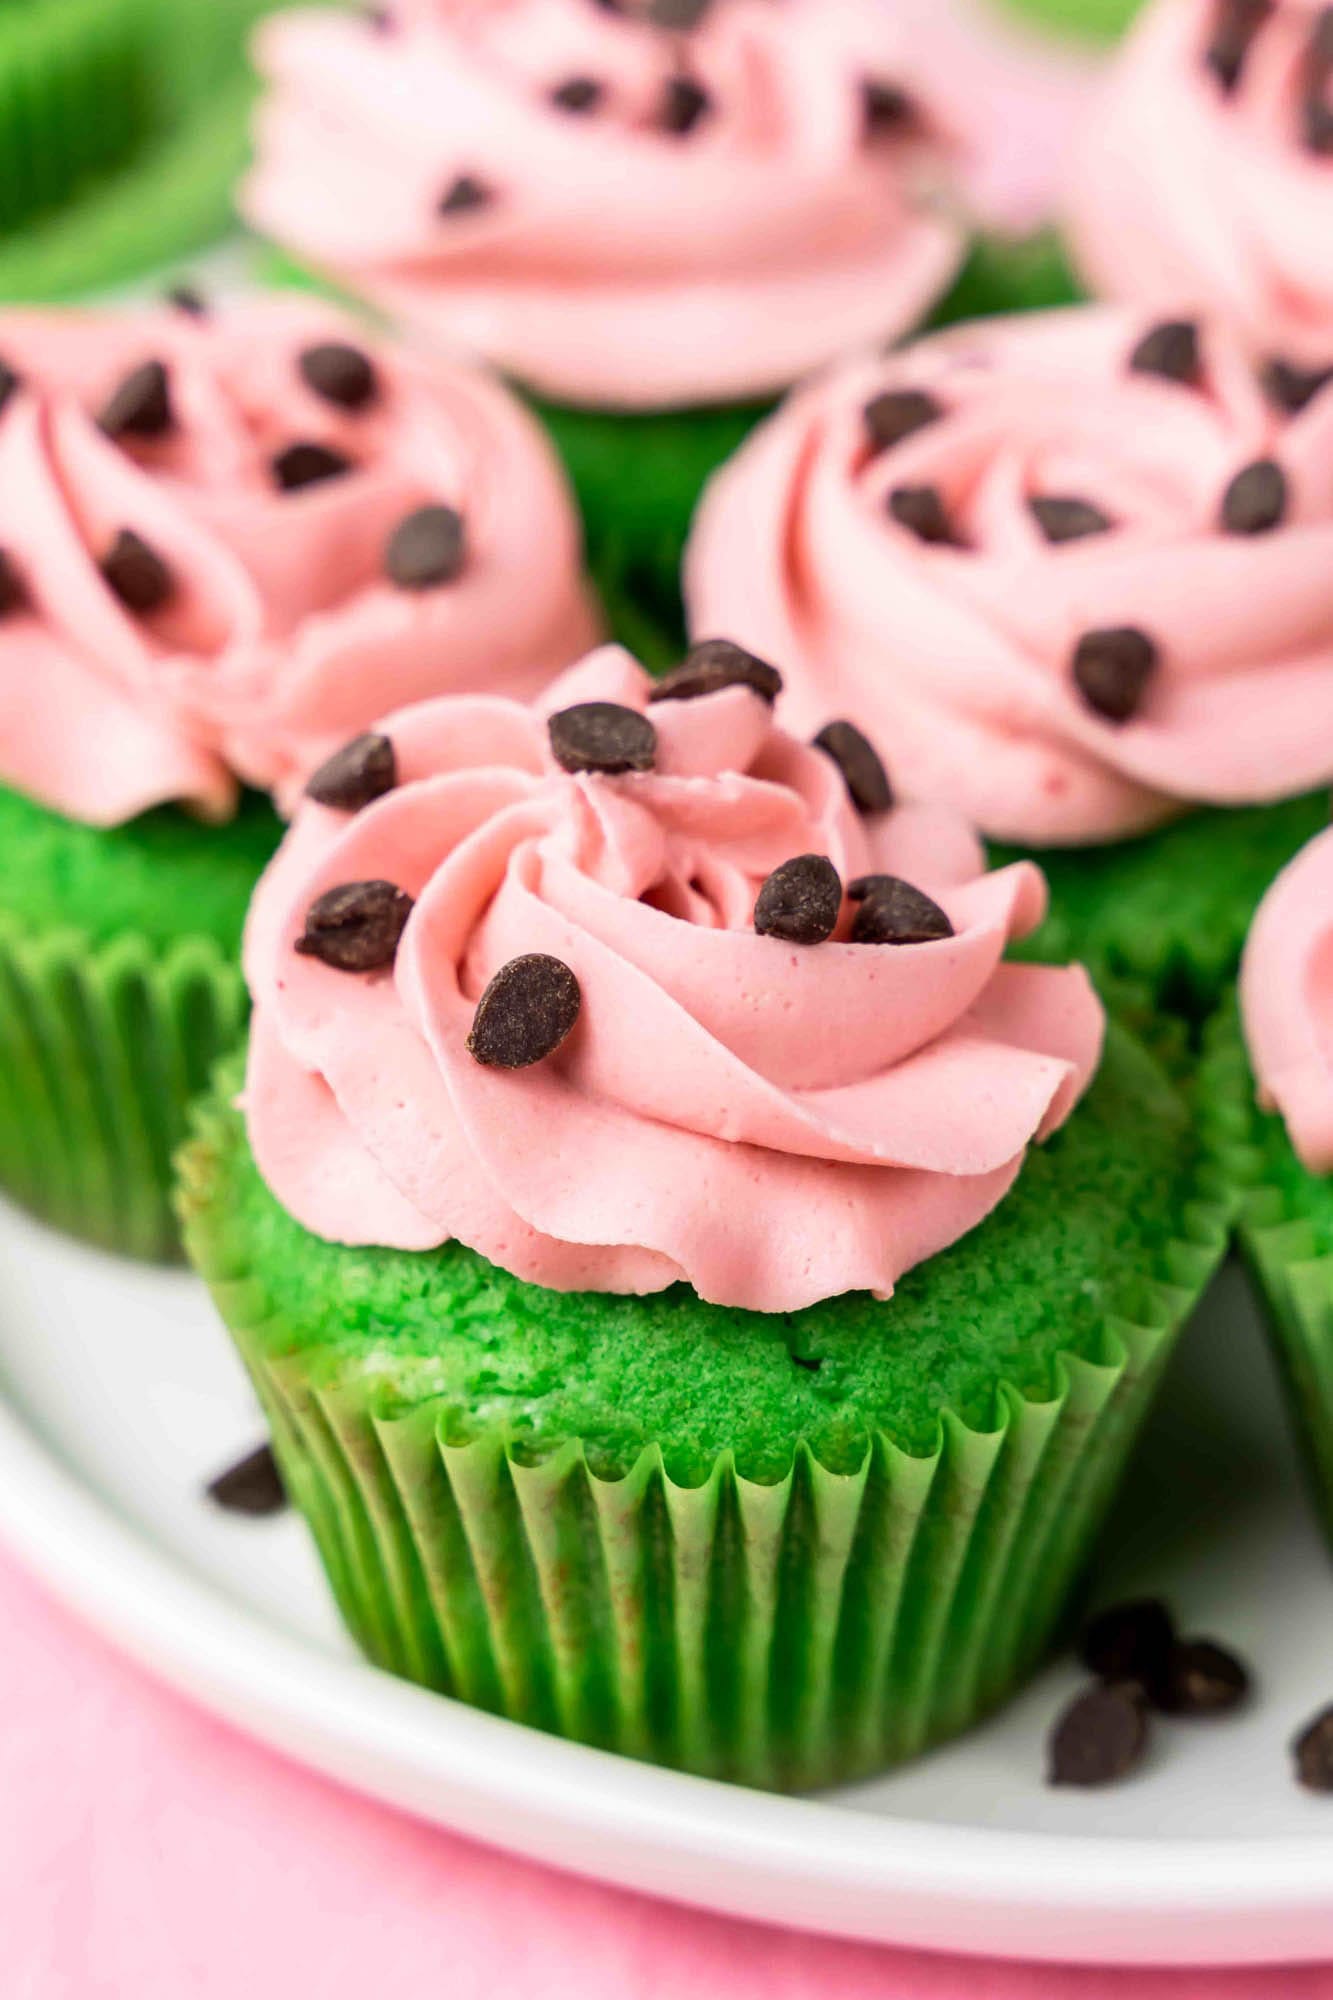 Watermelon like cupcakes with mini chocolate chips as seeds